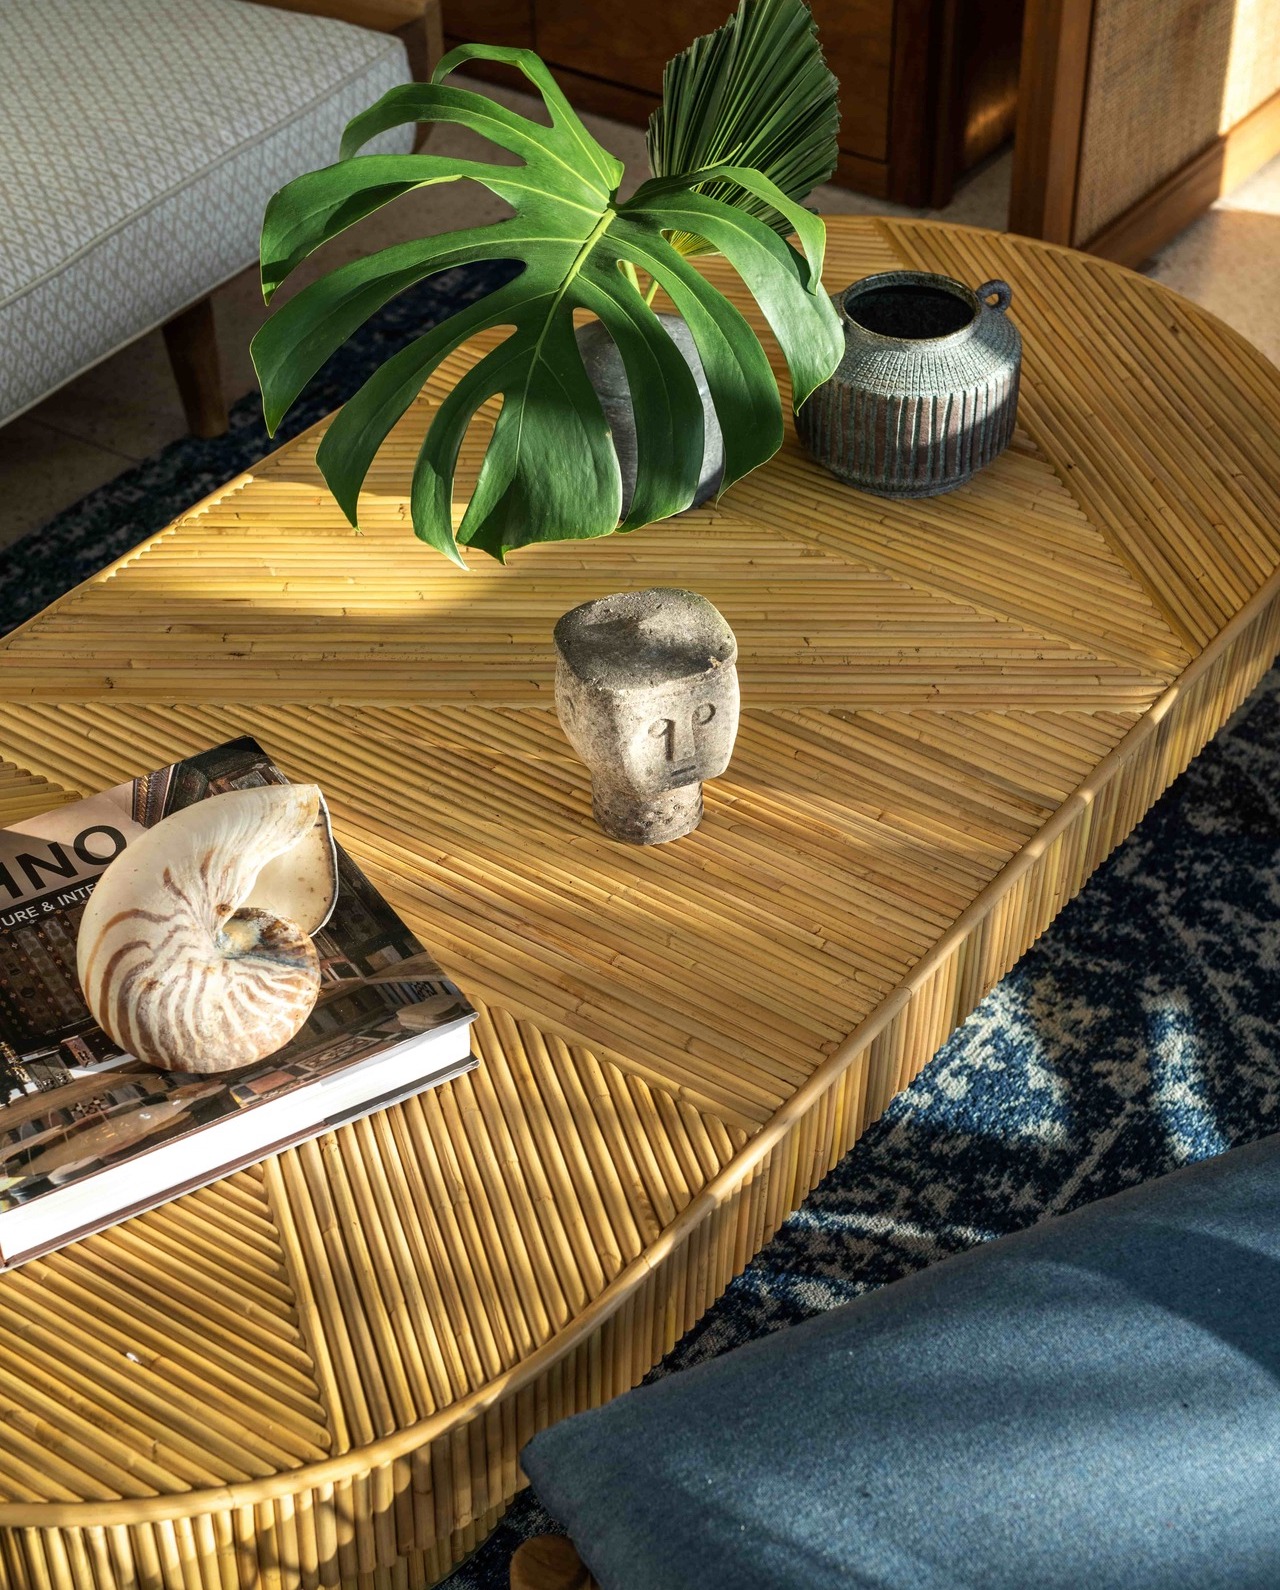 Bespoke lounge table with local statue, seashell and bespoke ceramics.